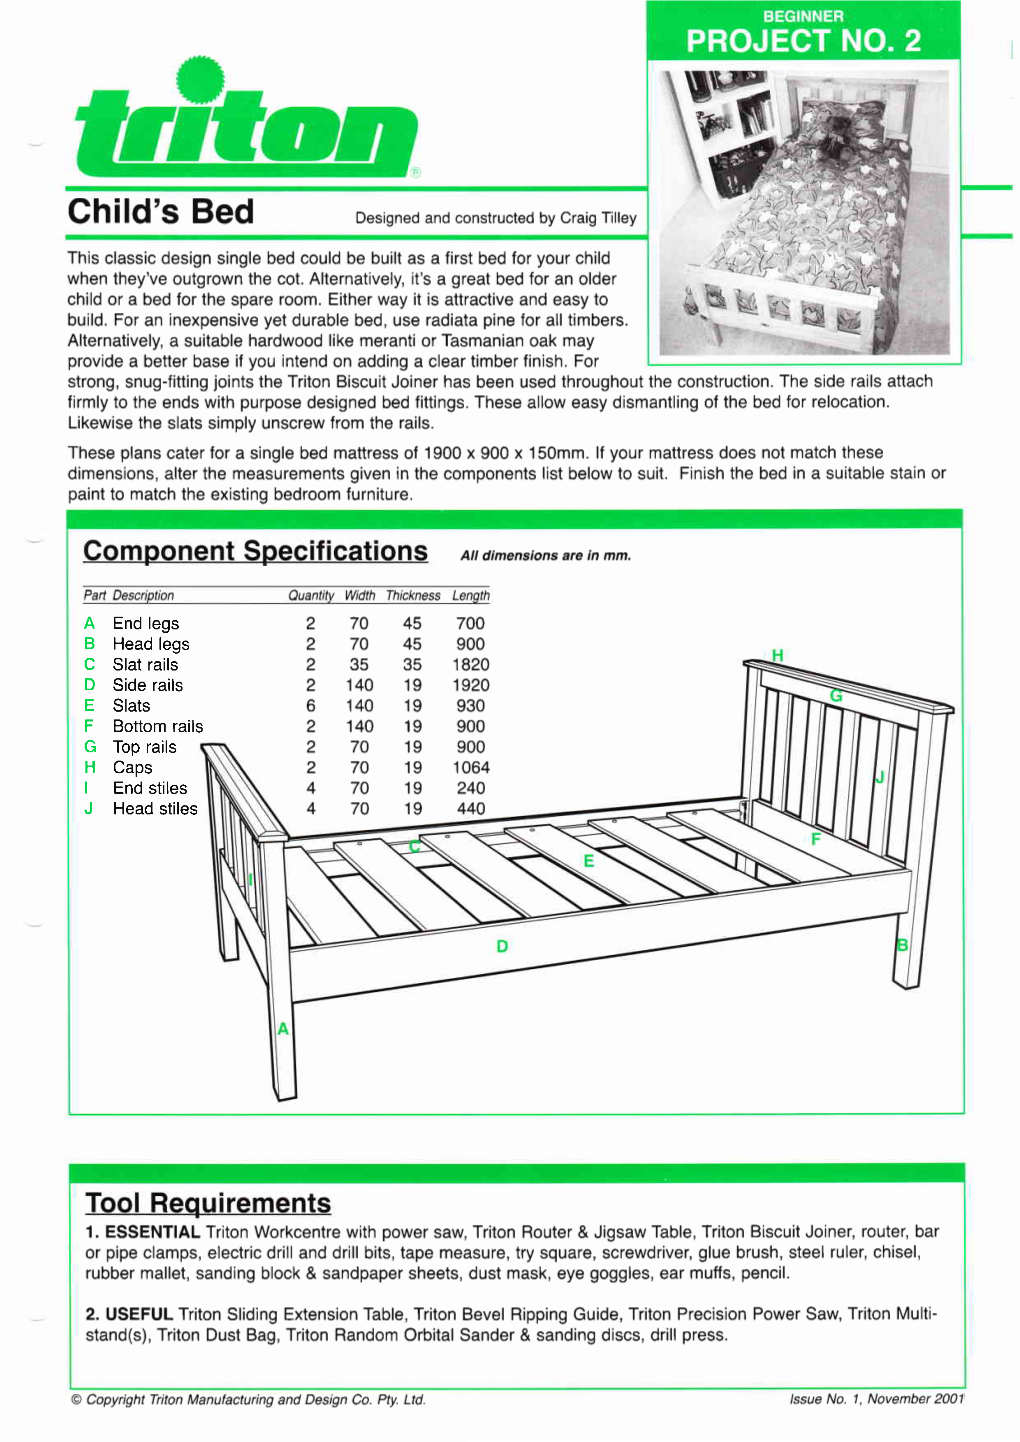 Child's Bed Designed and Constructed by Craig Tilley